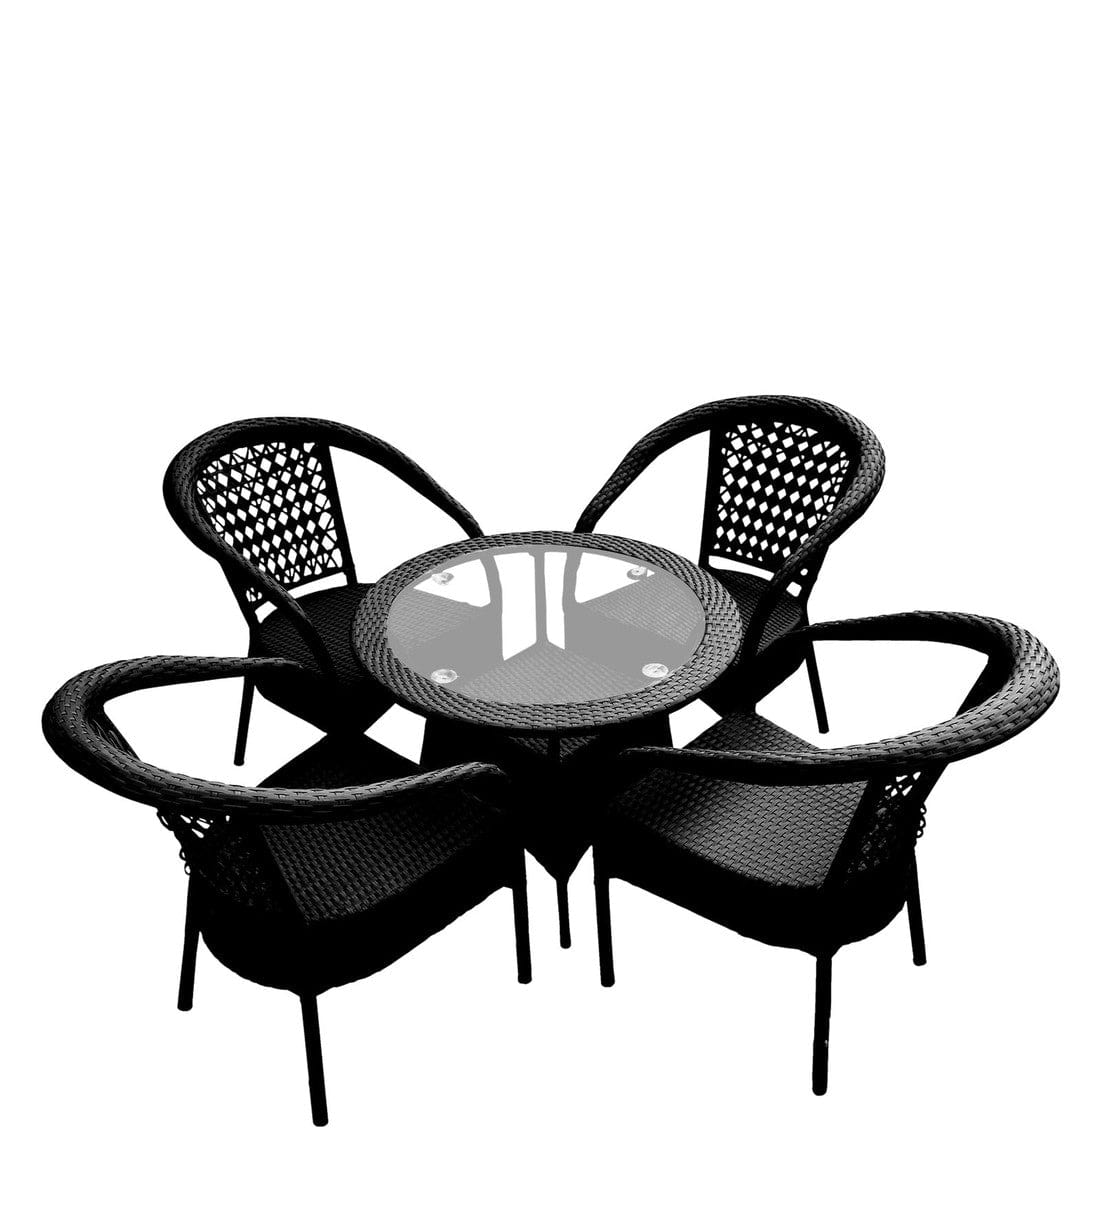 Dreamline Outdoor Coffee Table Set - 4 Chairs And Table Set (Black)